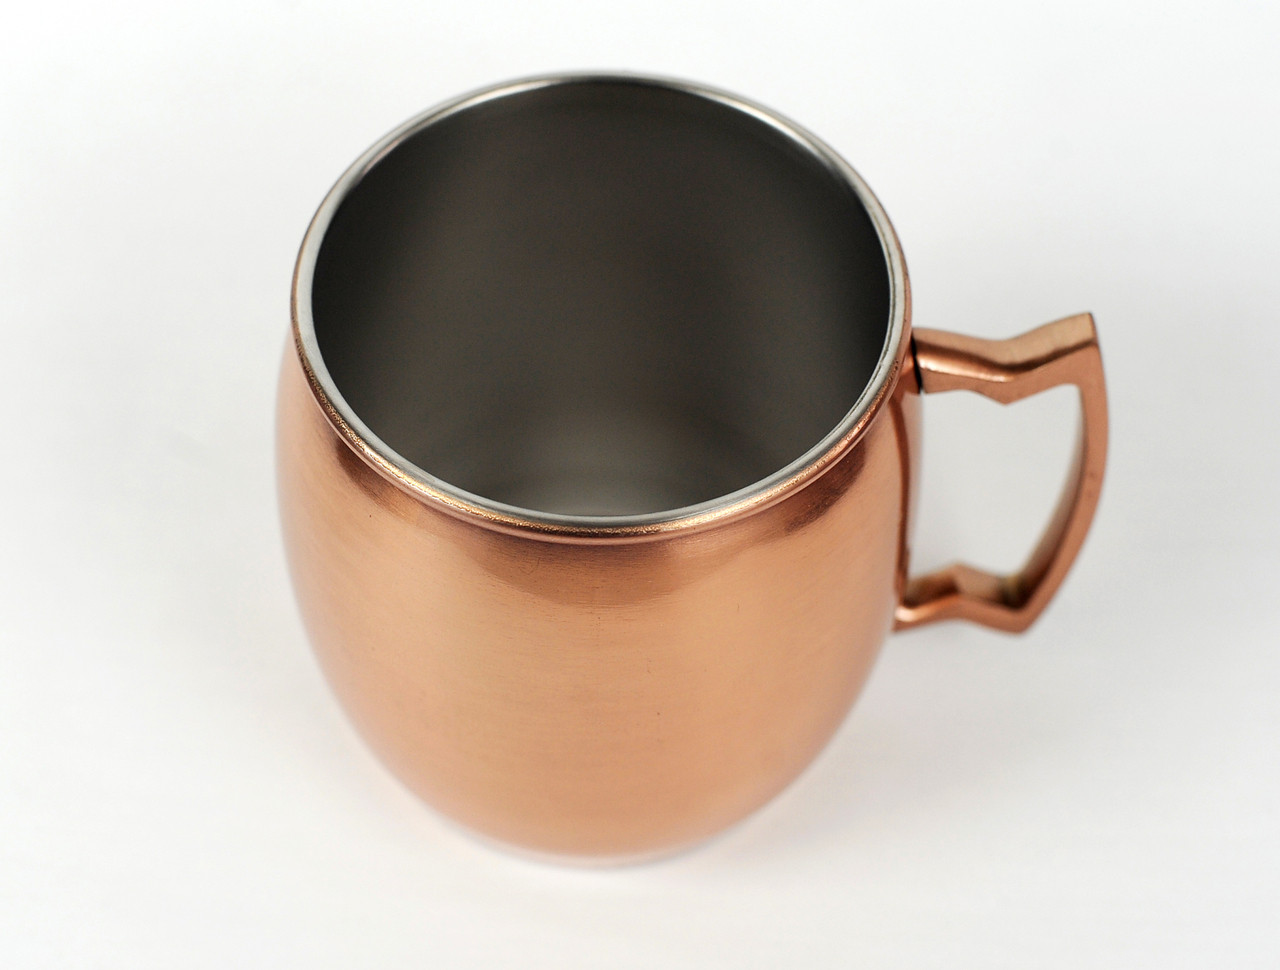 6PCS GENNISSY 304 Stainless Steel Moscow Mule Copper Mugs Beer